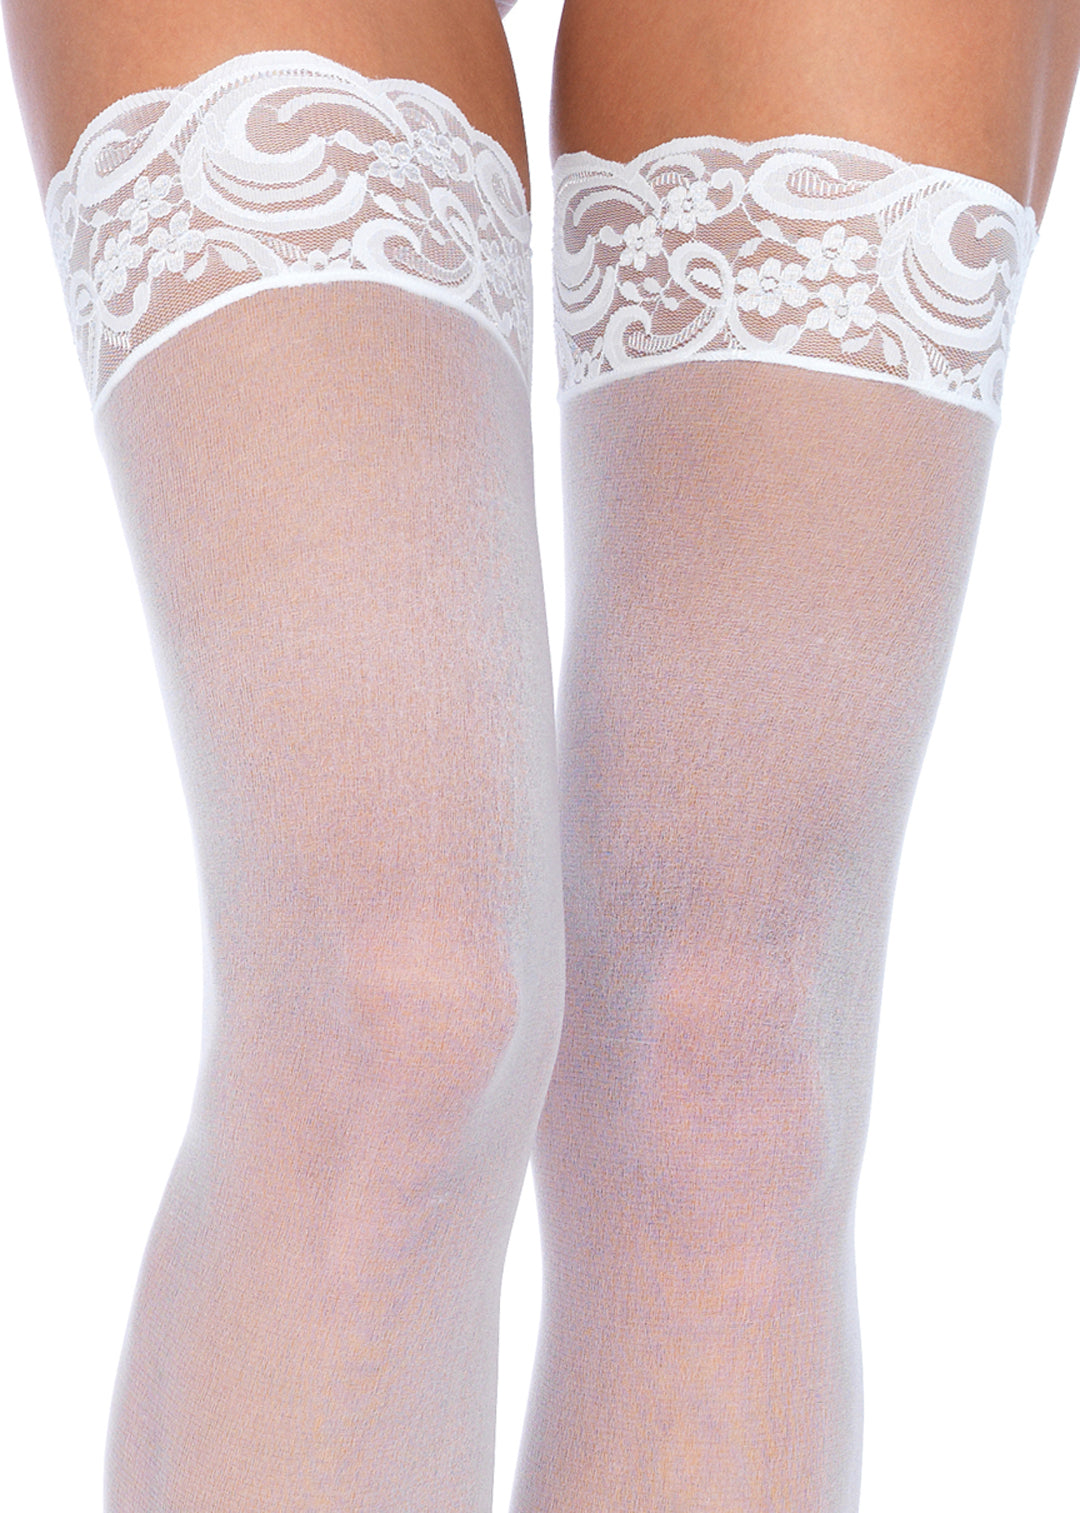 Plus Size Beige Lace Top Thigh High Fishnet Stockings